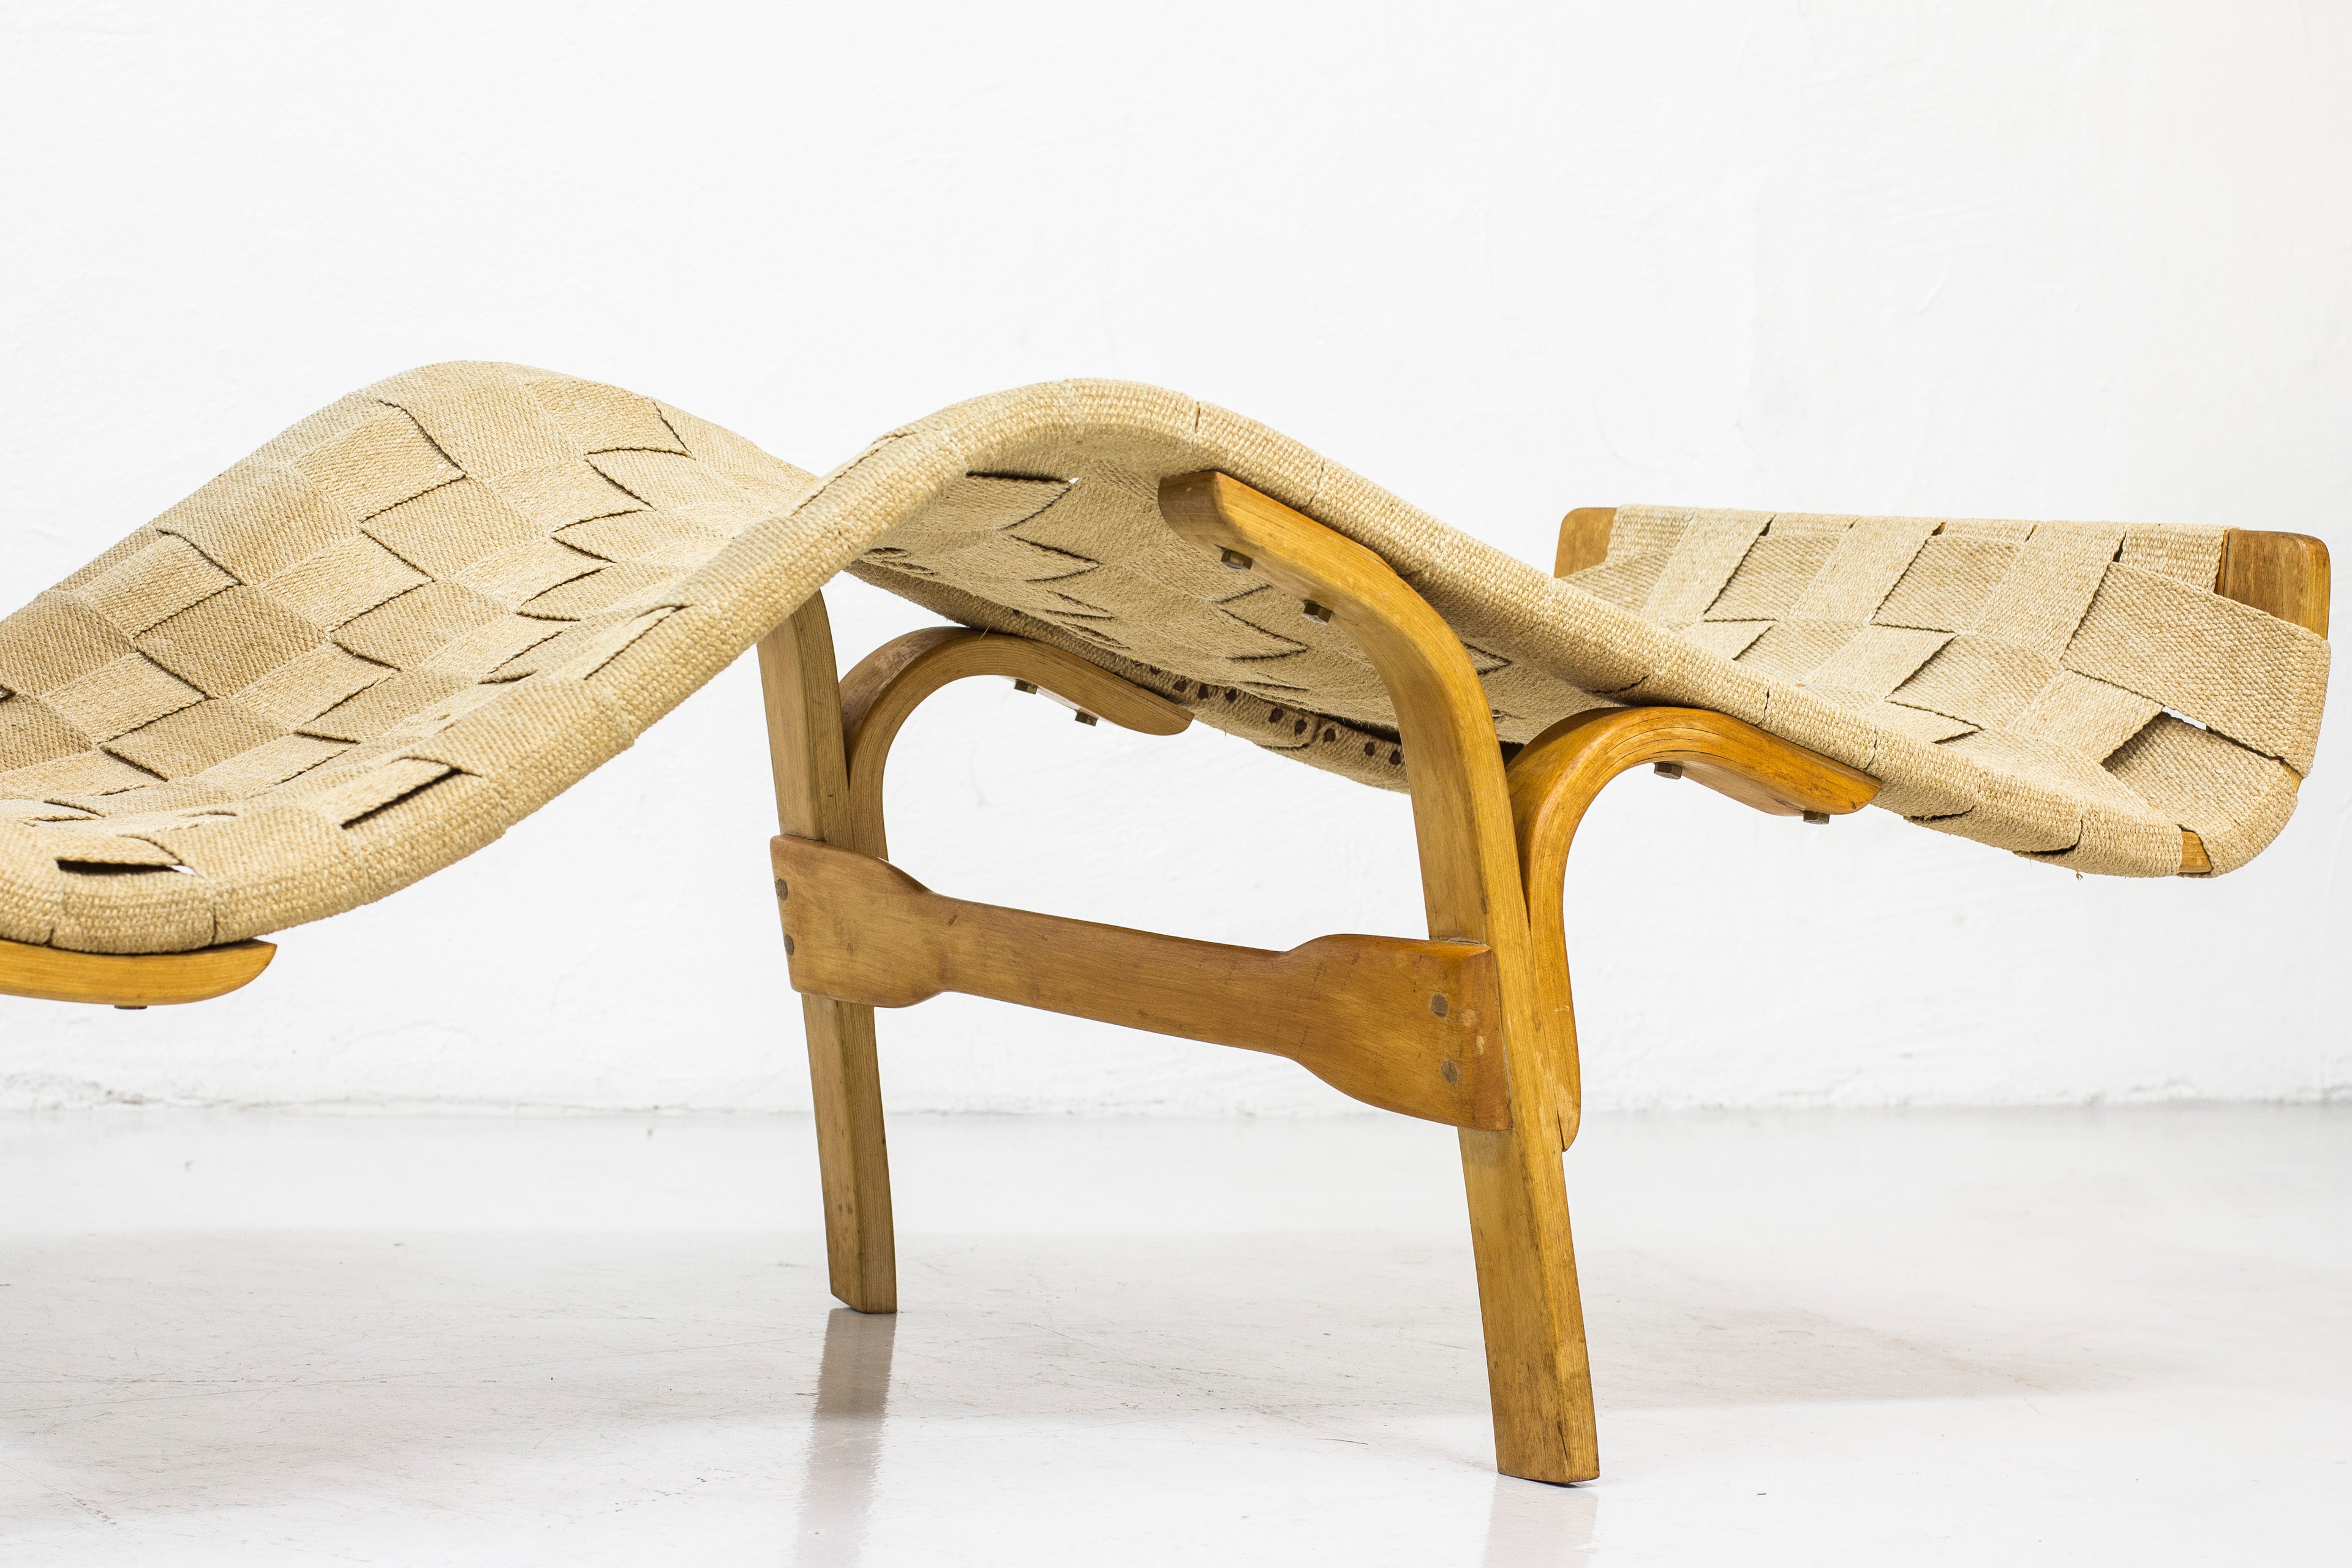 Chaise longue in the manner of Bruno Mathsson